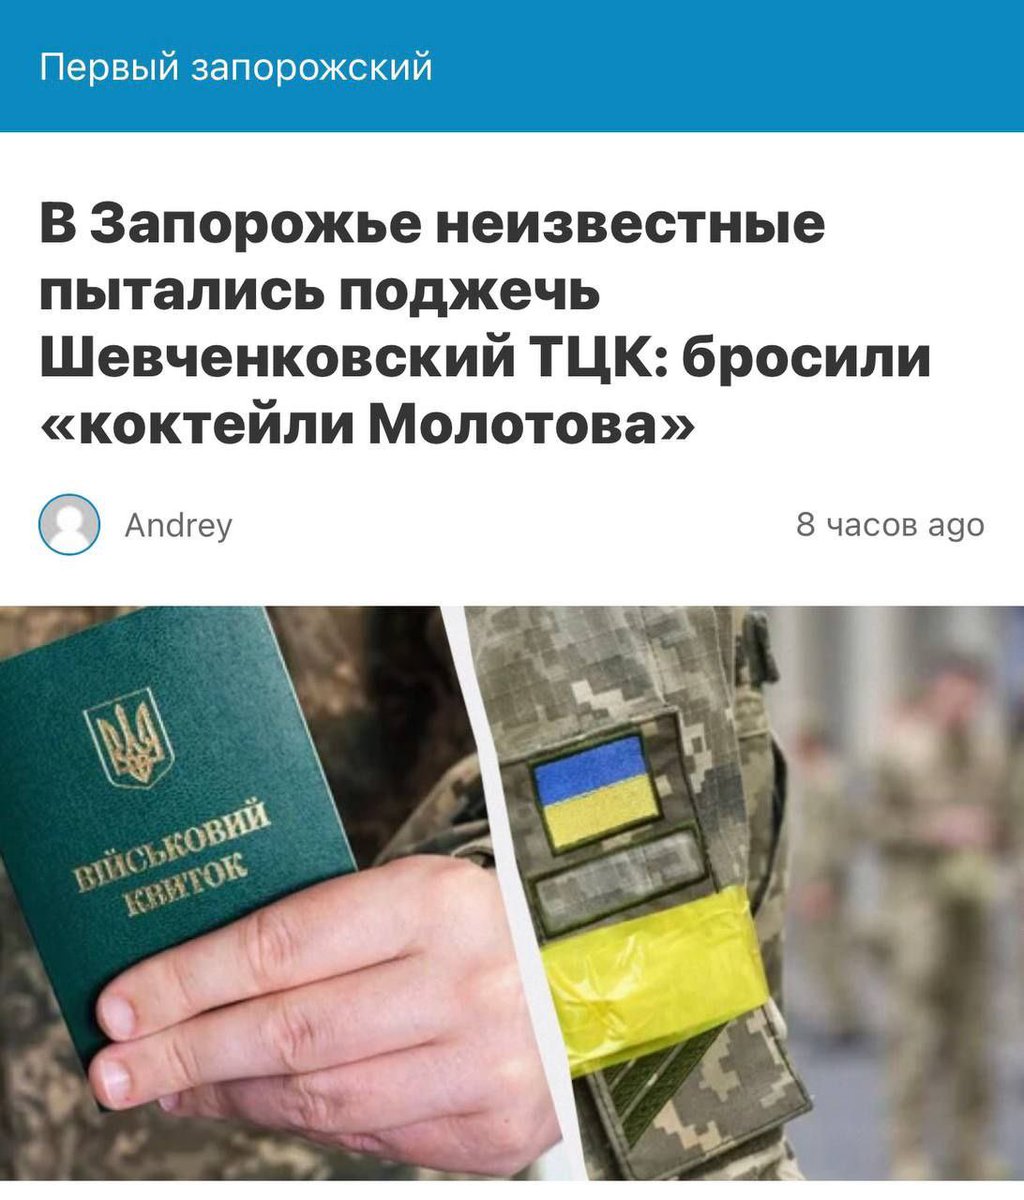 You won’t believe it, but on May 11, a military registration and enlistment office was set on fire for the first time in Ukraine! Unknown persons threw a couple of Molotov cocktails at the Shevchenkovsky TCC in Zaporozhye.